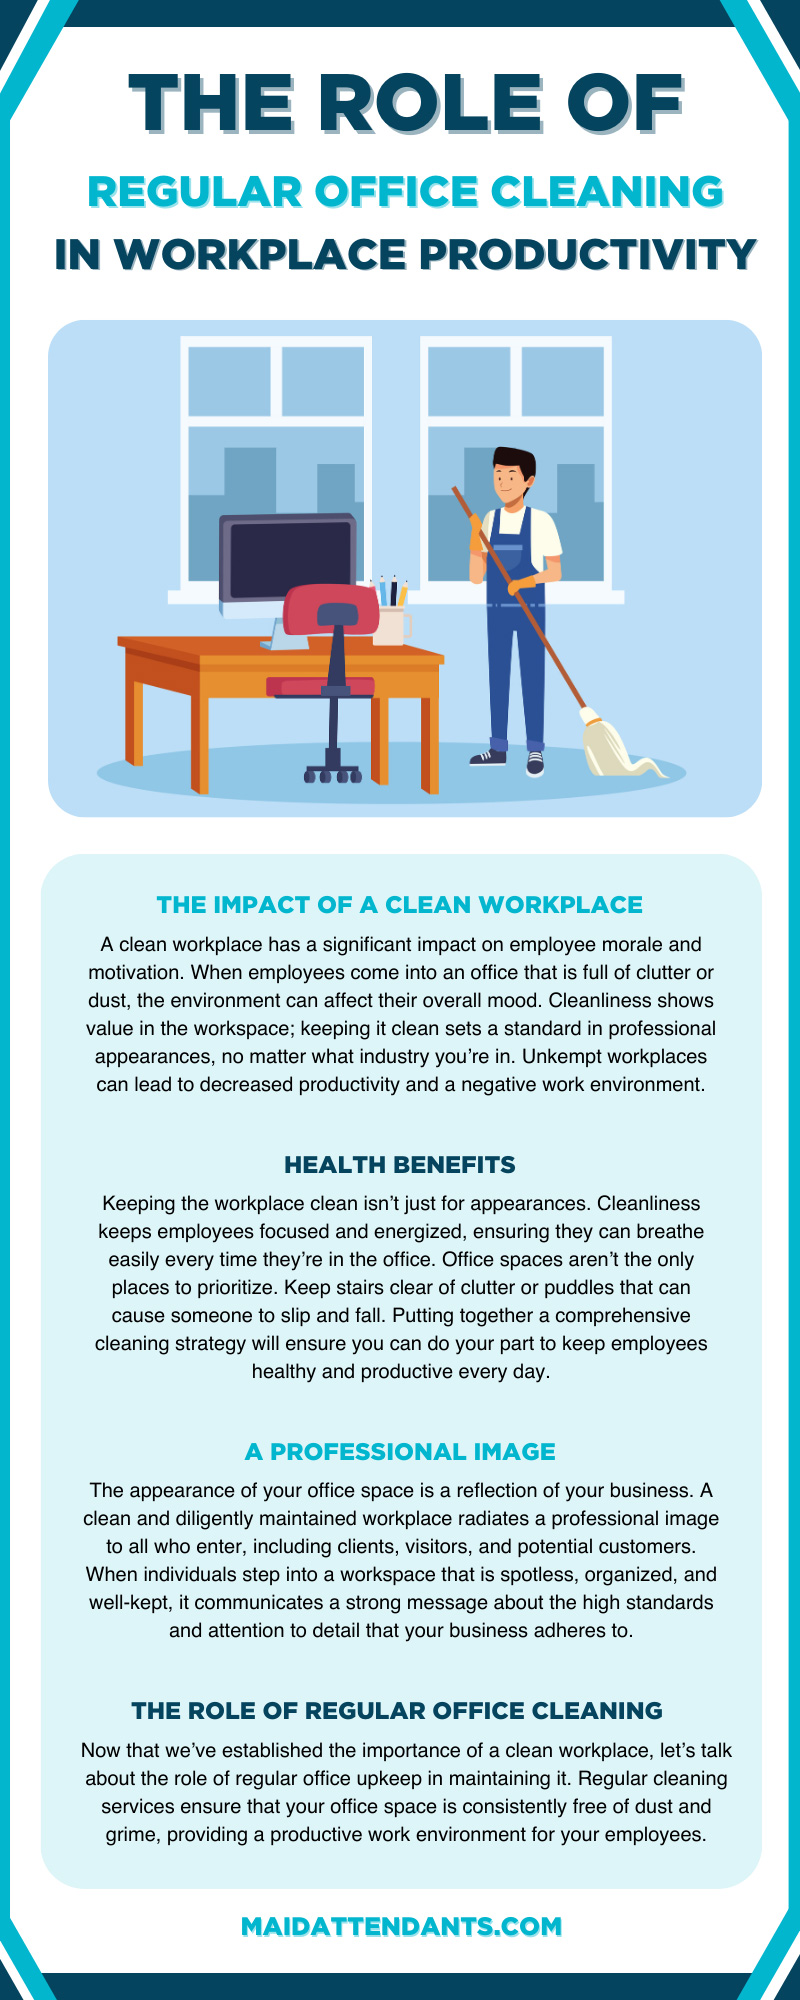 The Role of Regular Office Cleaning in Workplace Productivity